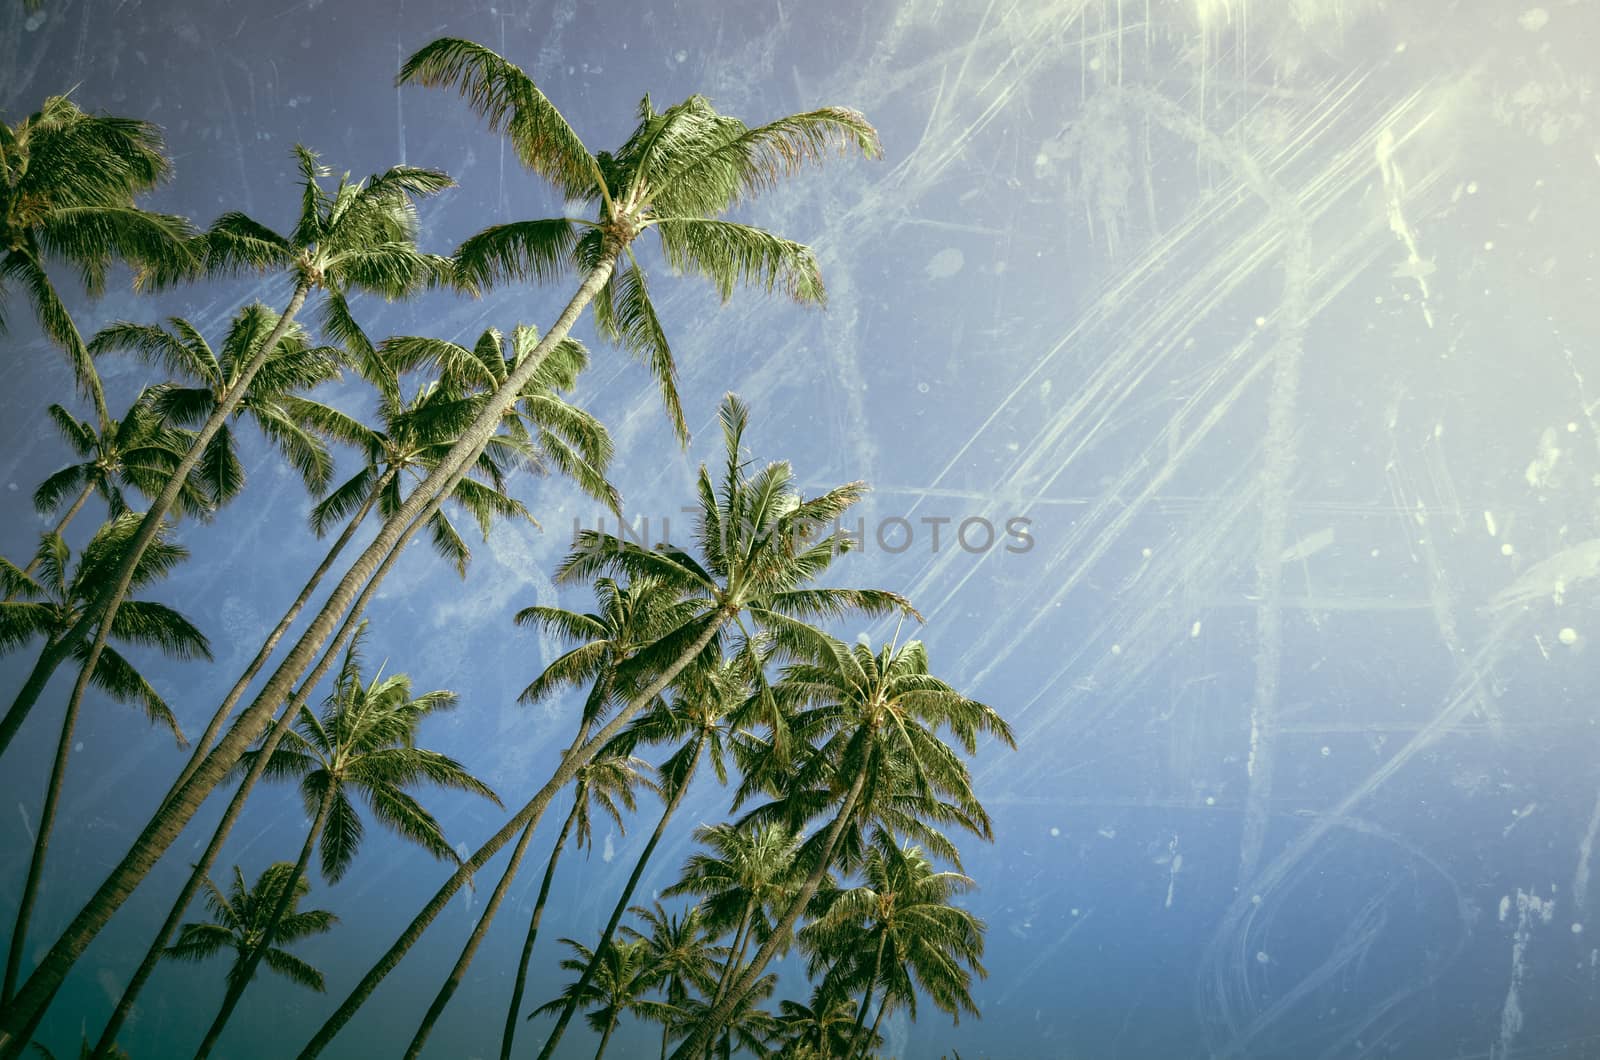 Aged Retro Worn Vintage Photo Of Tropical Palm Trees With Copy Space